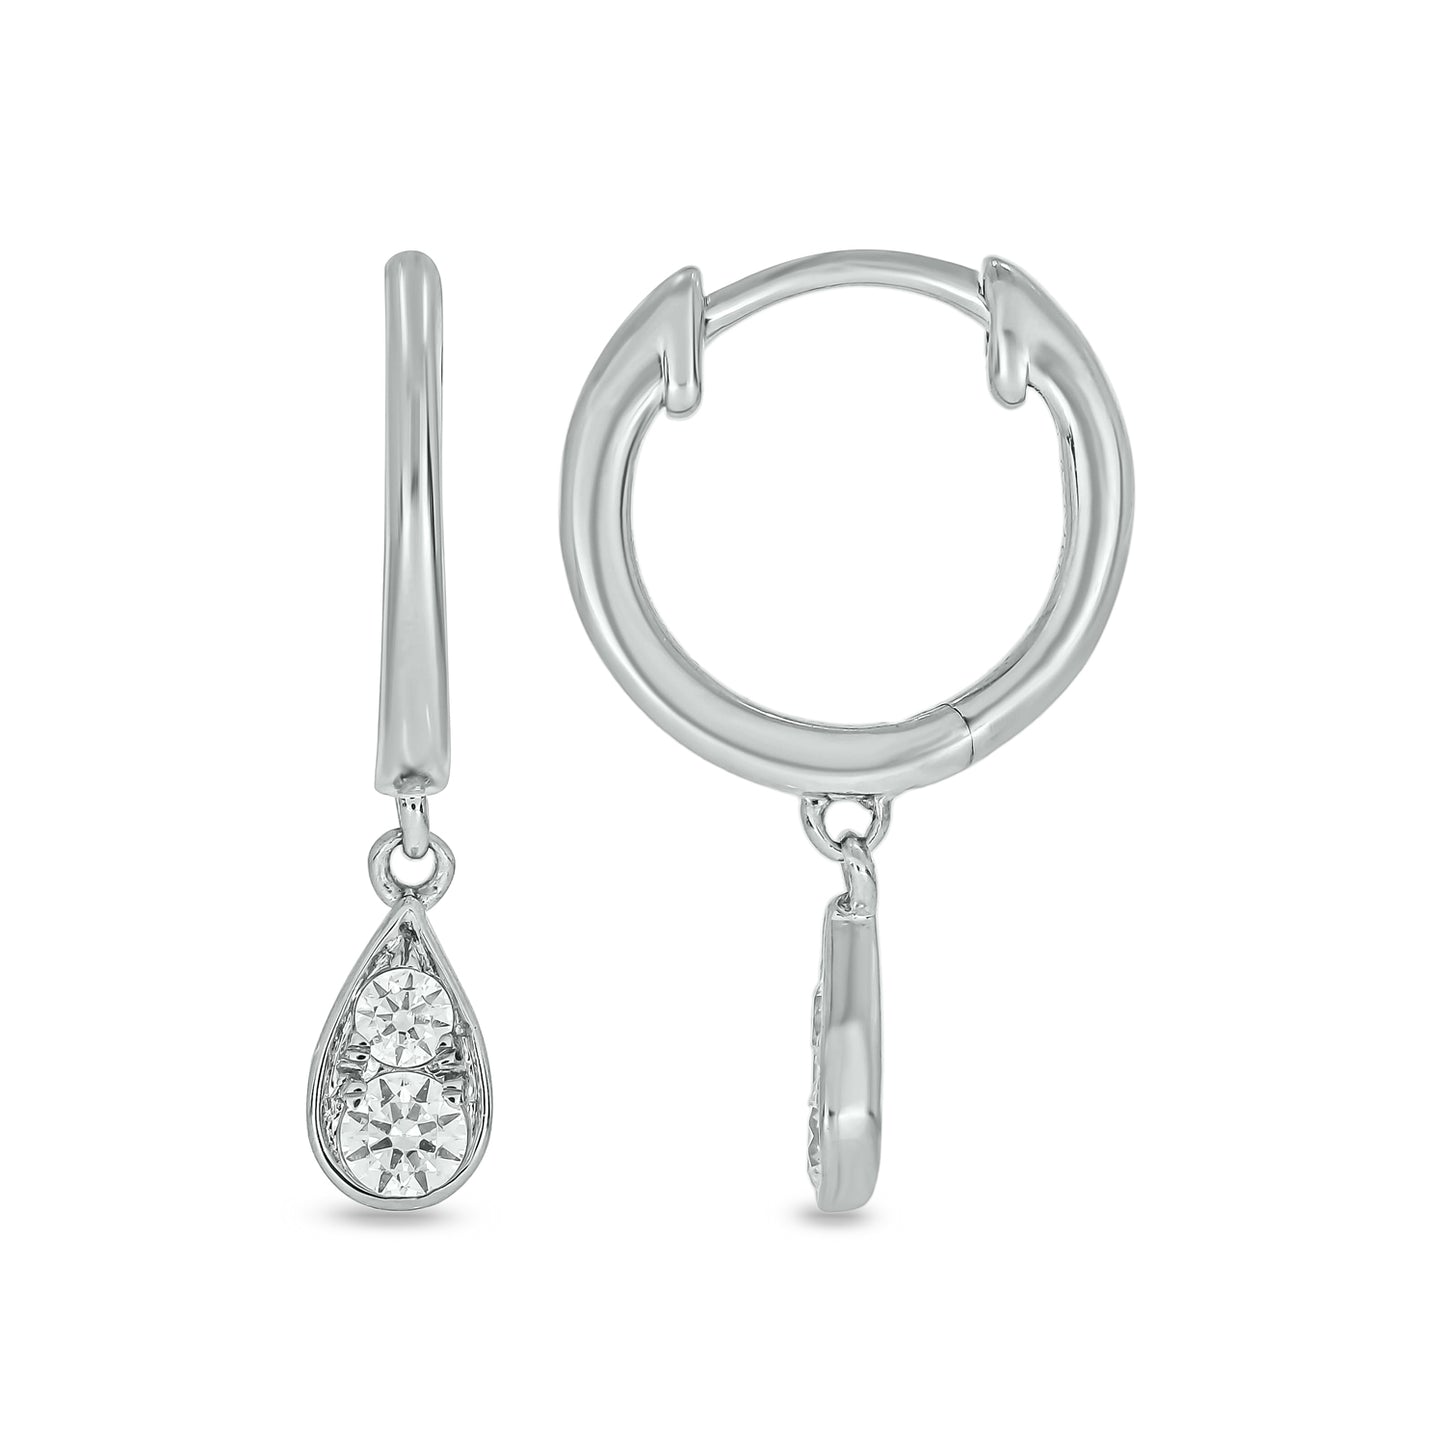 Classic Diamond Mini Everyday Earrings in 925 Sterling Silver